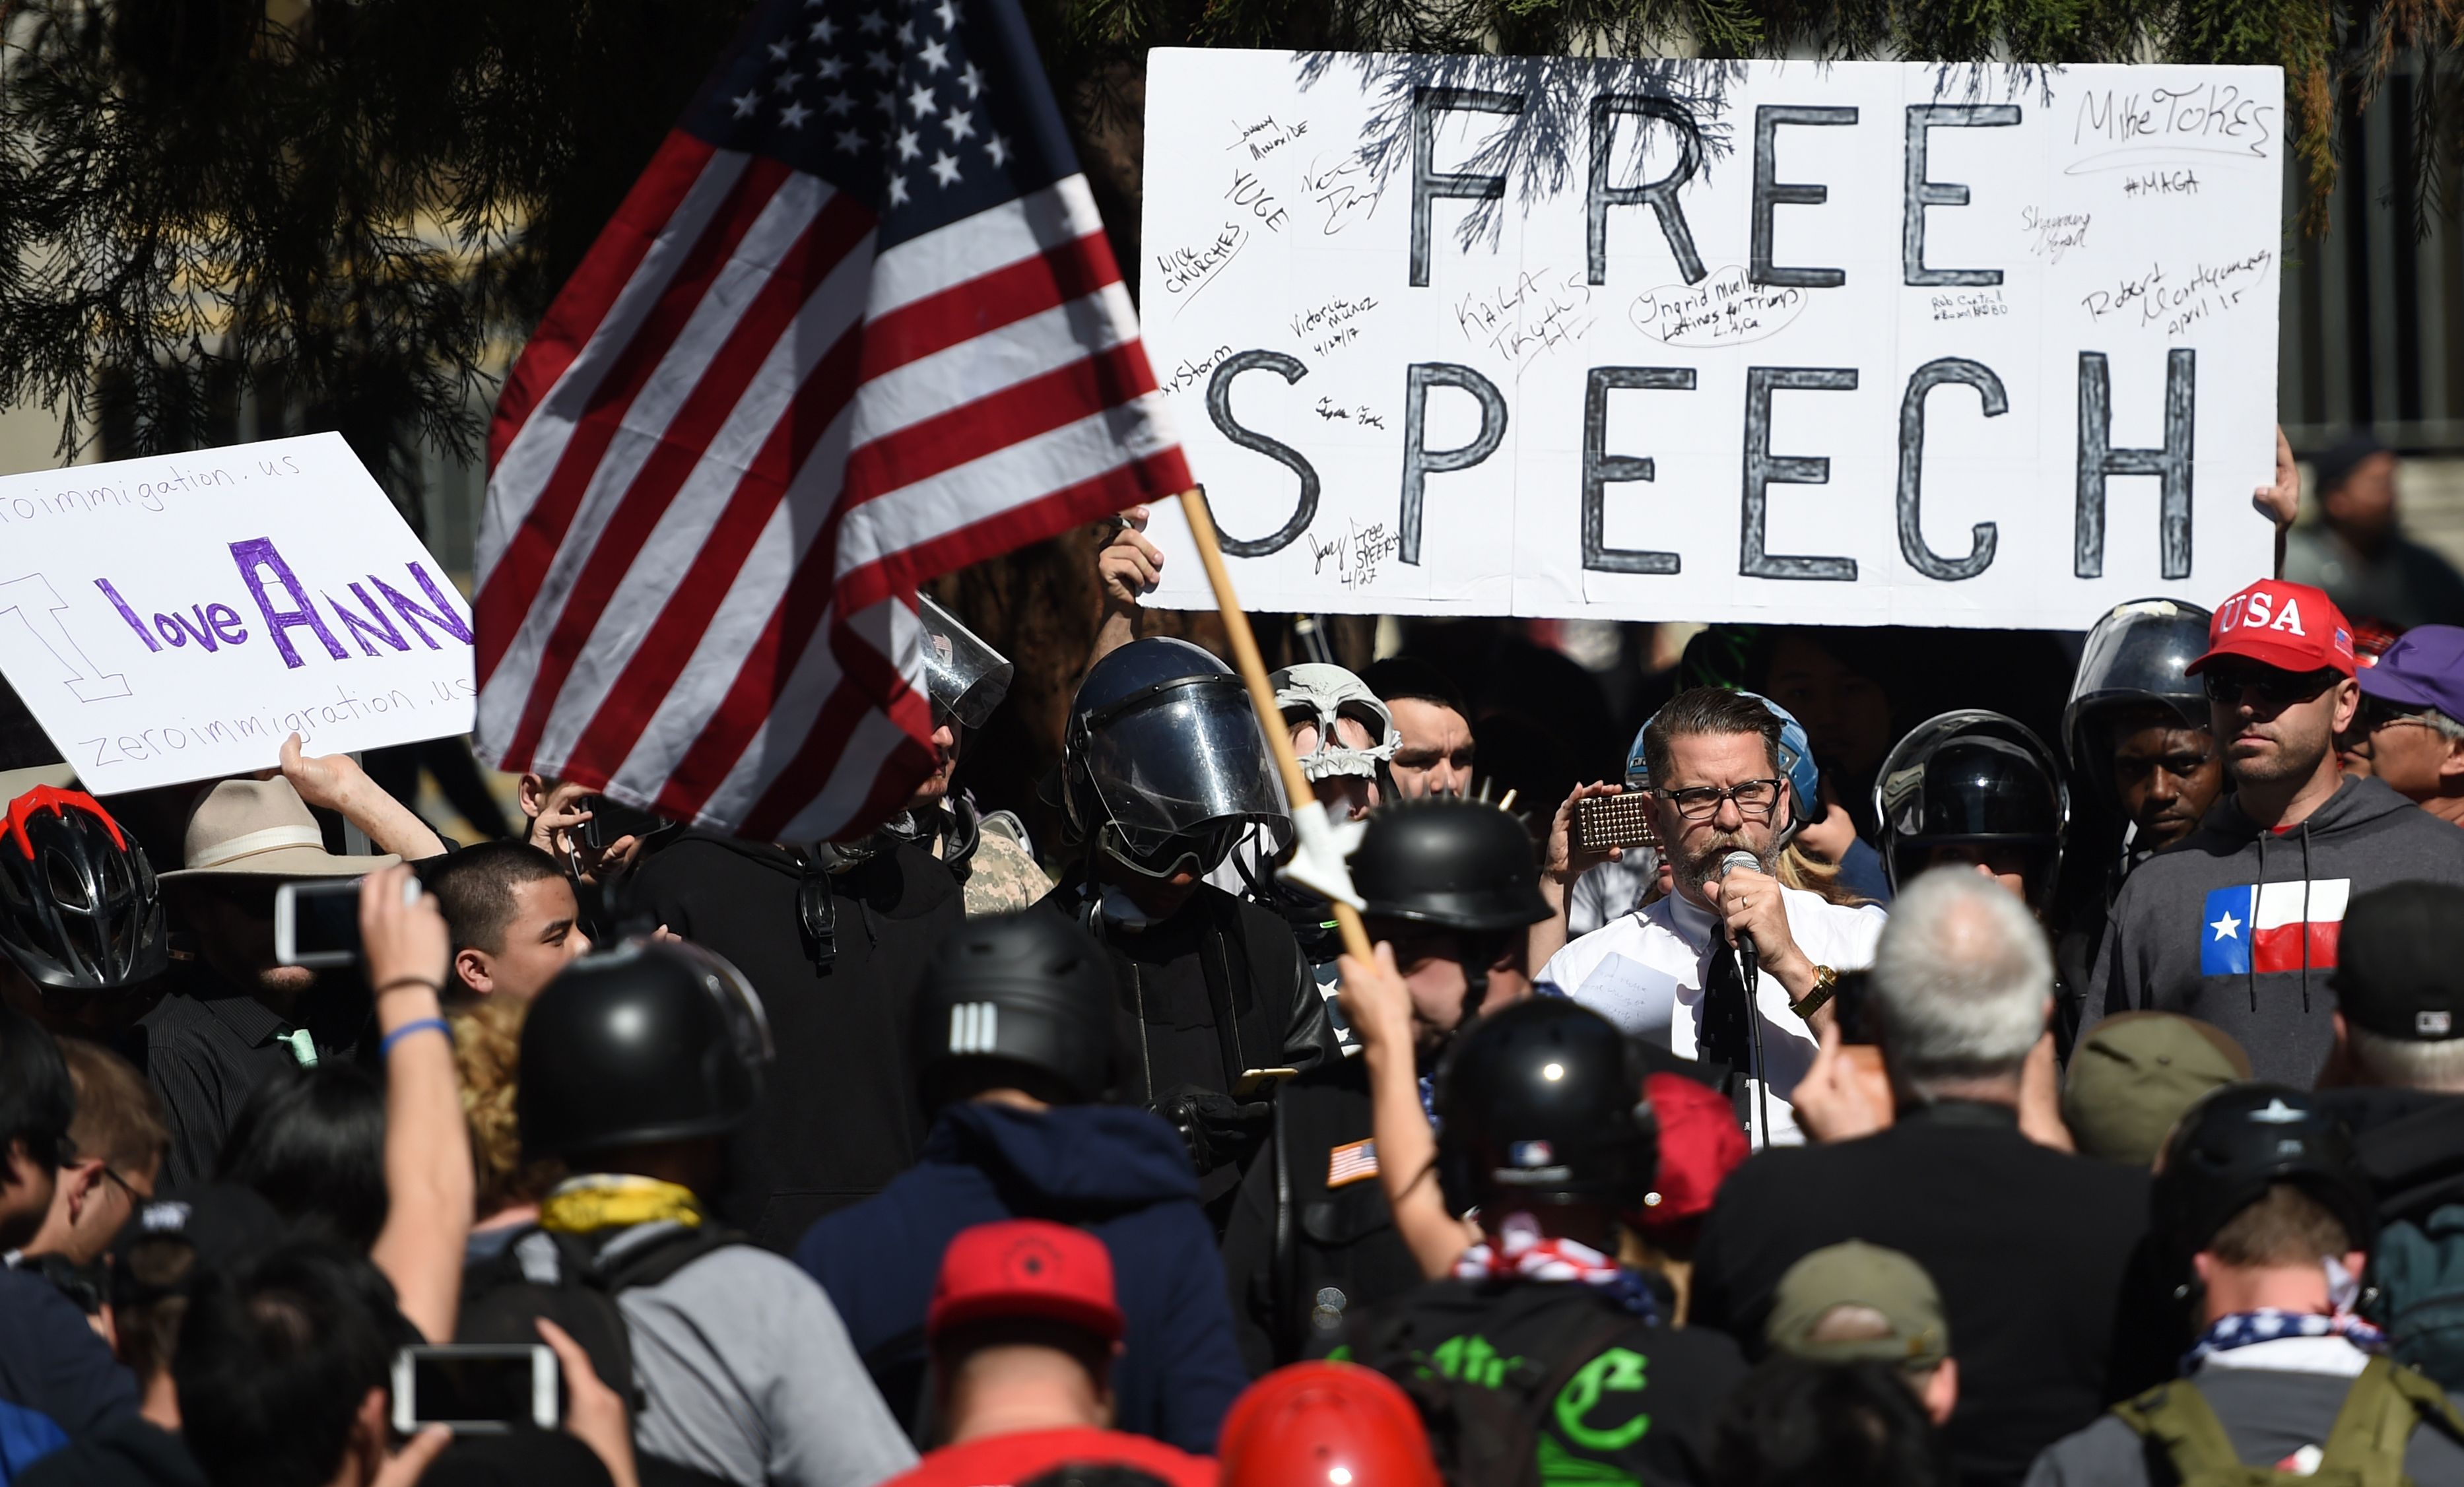 Vice Media co-founder and conservative speaker Gavin McInnes reads a speech written by Ann Coulter to a crowd during a rally in Berkeley, California on April 27, 2017. (Josh Edelson—AFP/Getty Images)